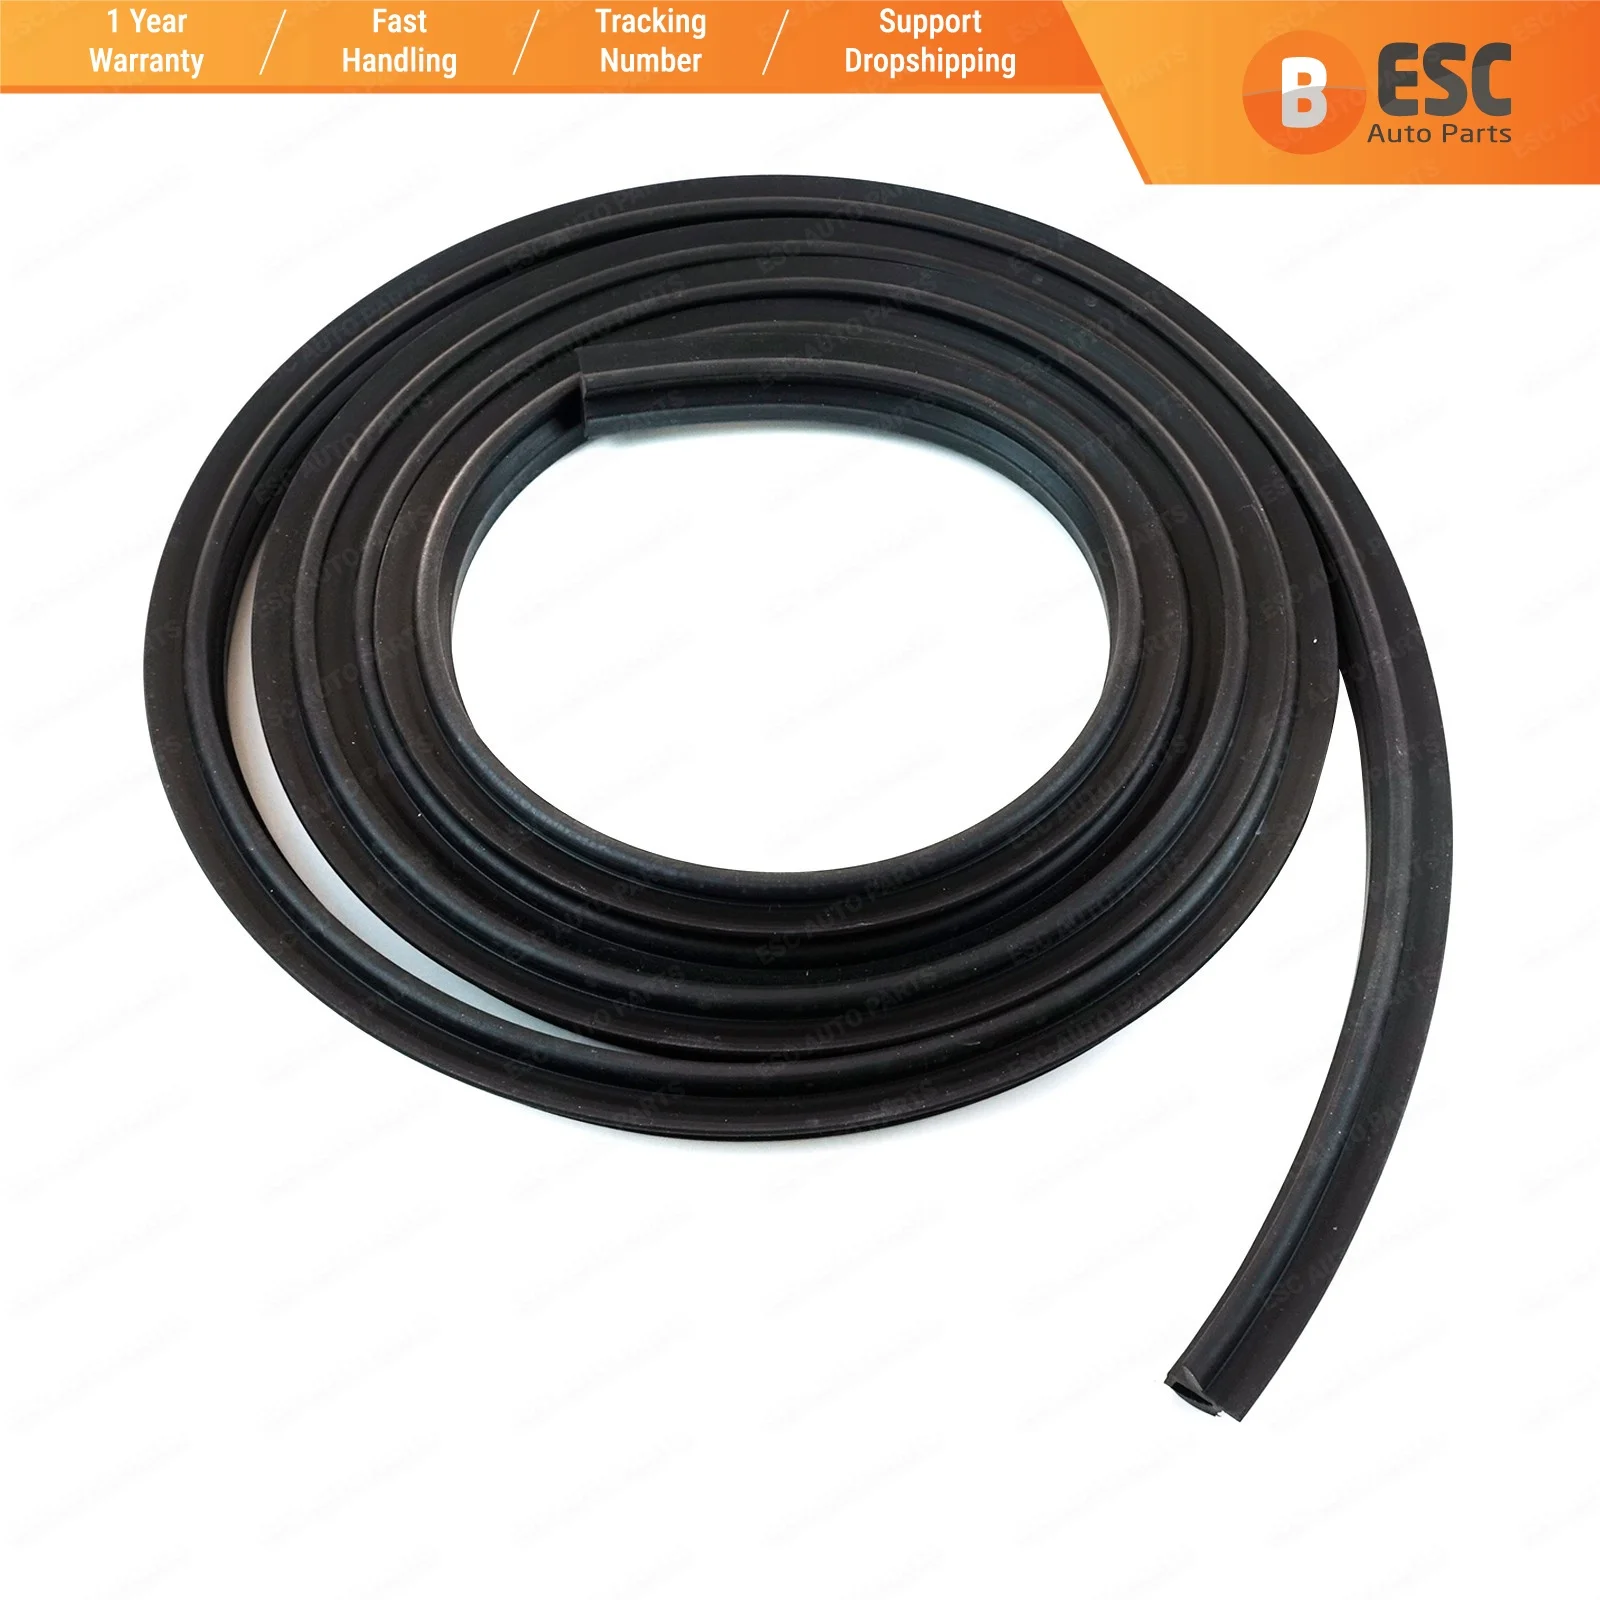 

For Renault Clio MK2 Campus 7701045038 ESC Auto ESR604 Manual Electric Sunroof Rubber Seal Gasket Weatherstrip Lenght:250cm